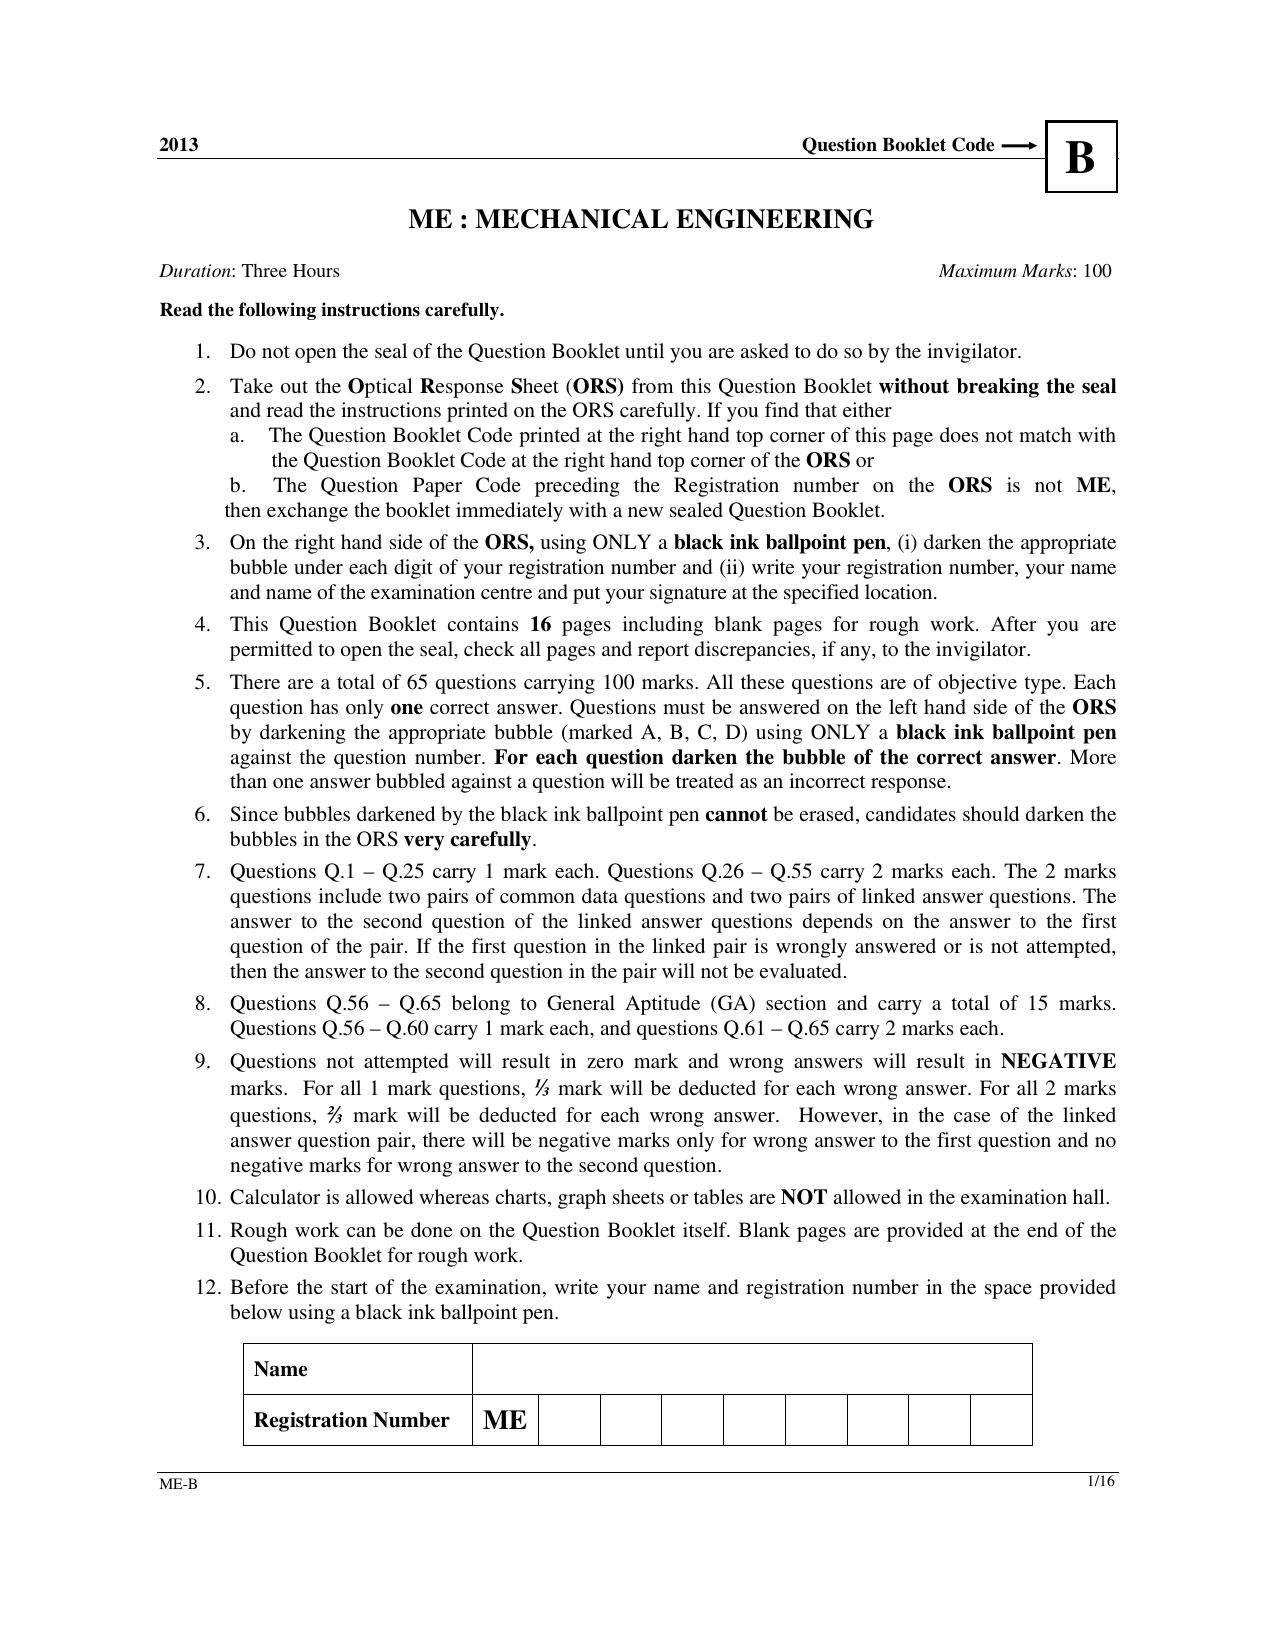 GATE 2013 Mechanical Engineering (ME) Question Paper with Answer Key - Page 16